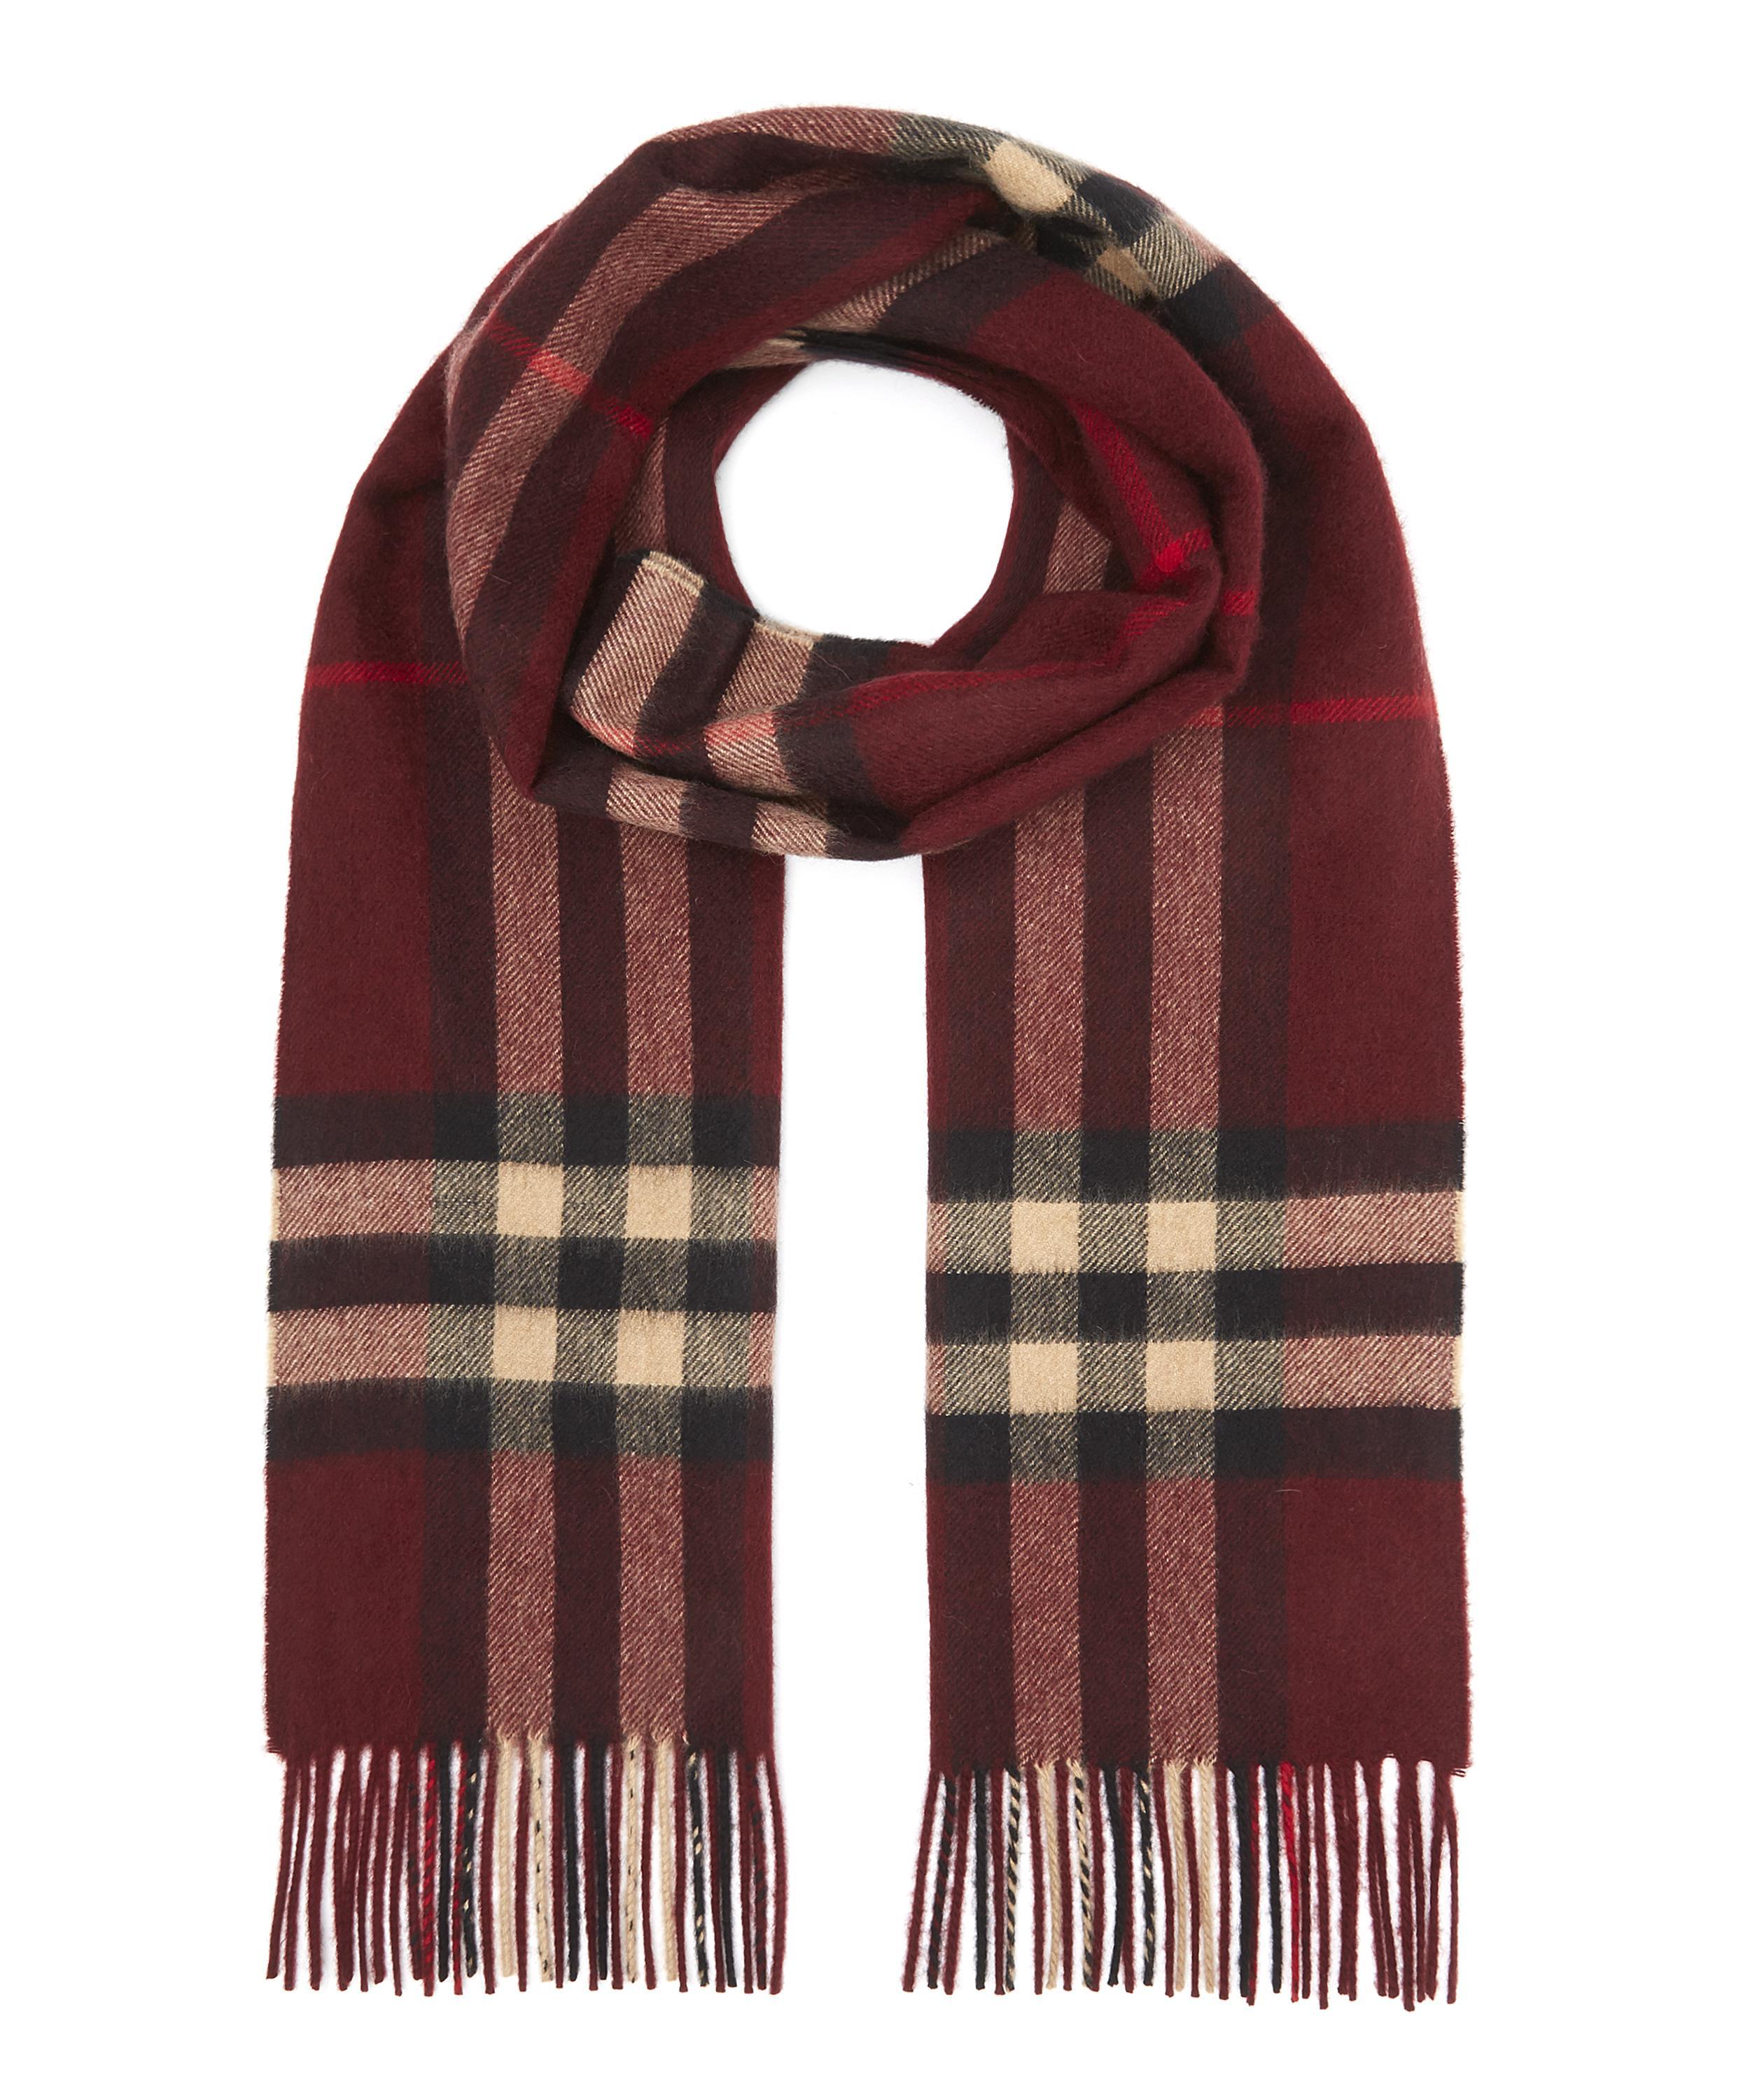 Lyst - Burberry Giant Icon Check Cashmere Scarf in Red for Men